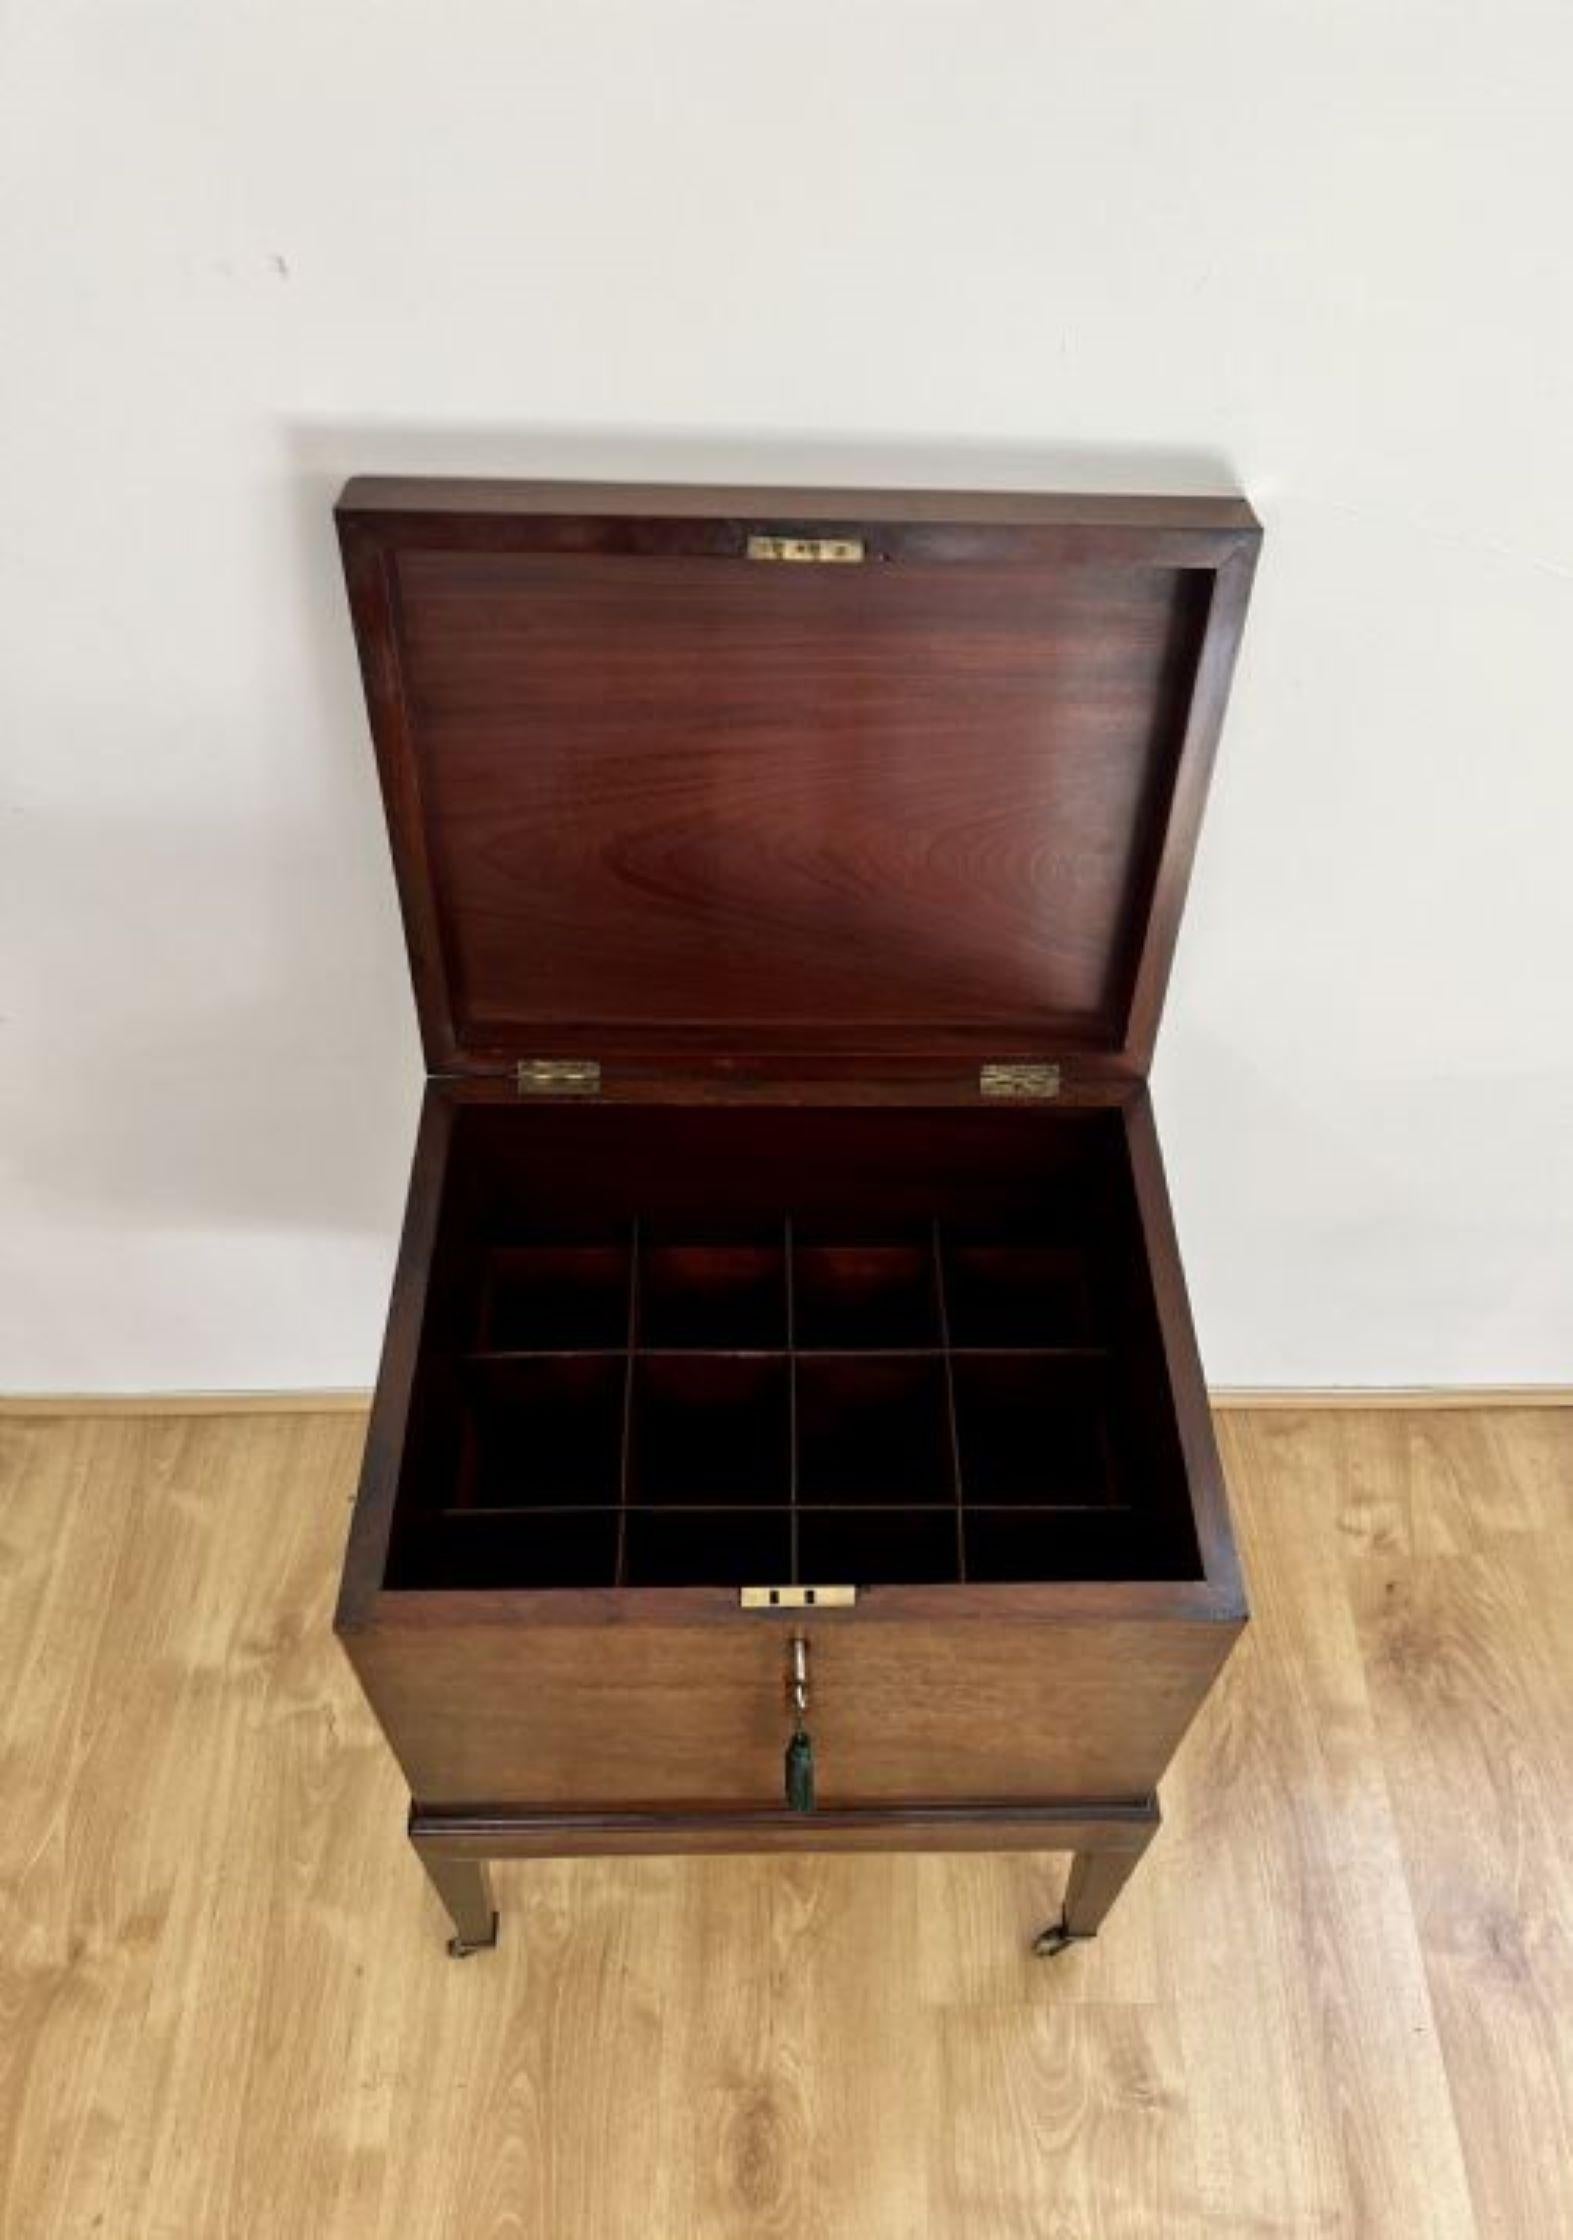 Antique George III quality mahogany callarette having a quality figured mahogany and satinwood inlaid stringing, with a lift up top opening to reveal the original storage compartments for wine bottles, original brass carrying handles to the sides